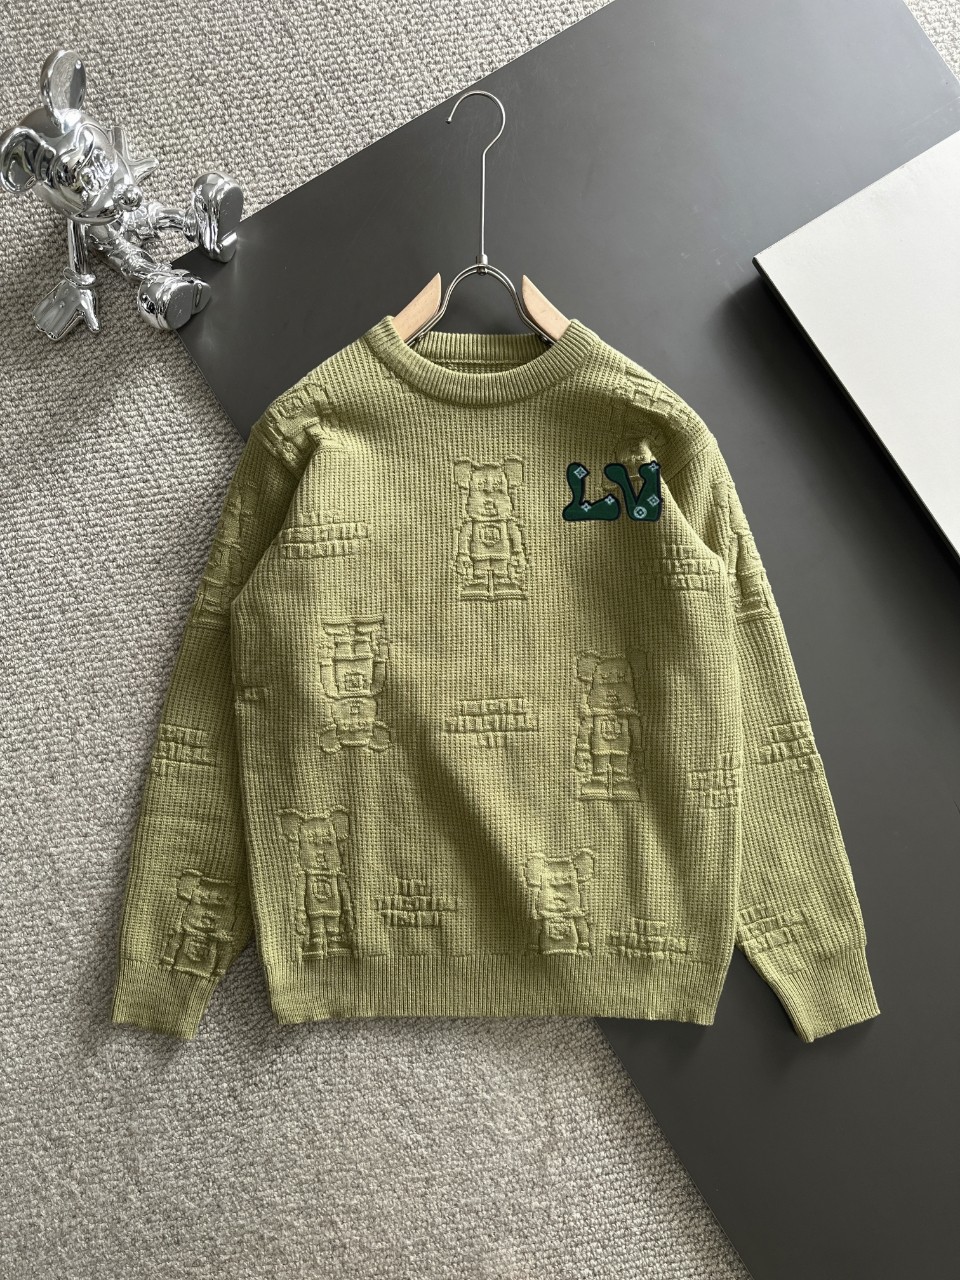 Louis Vuitton Clothing Sweatshirts Embroidery Wool Winter Collection Fashion